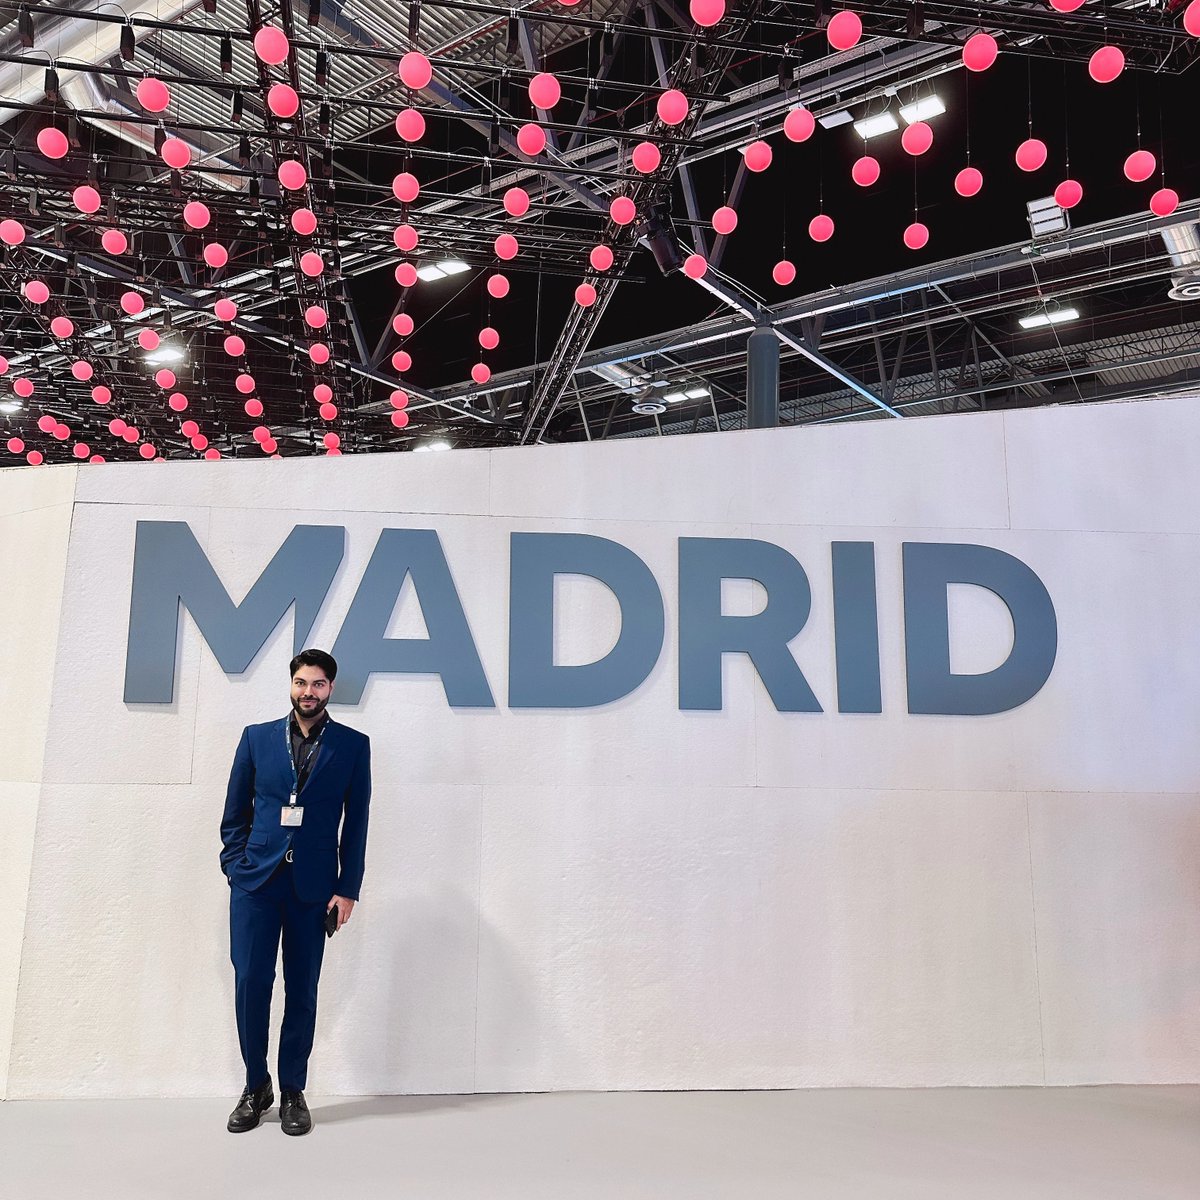 That’s a wrap, thank you so much @fitur_madrid MADRID 2024!! 👏🎉😊🙏 #fitur #fitur2024 #fiturmadrid #onlyinmadrid